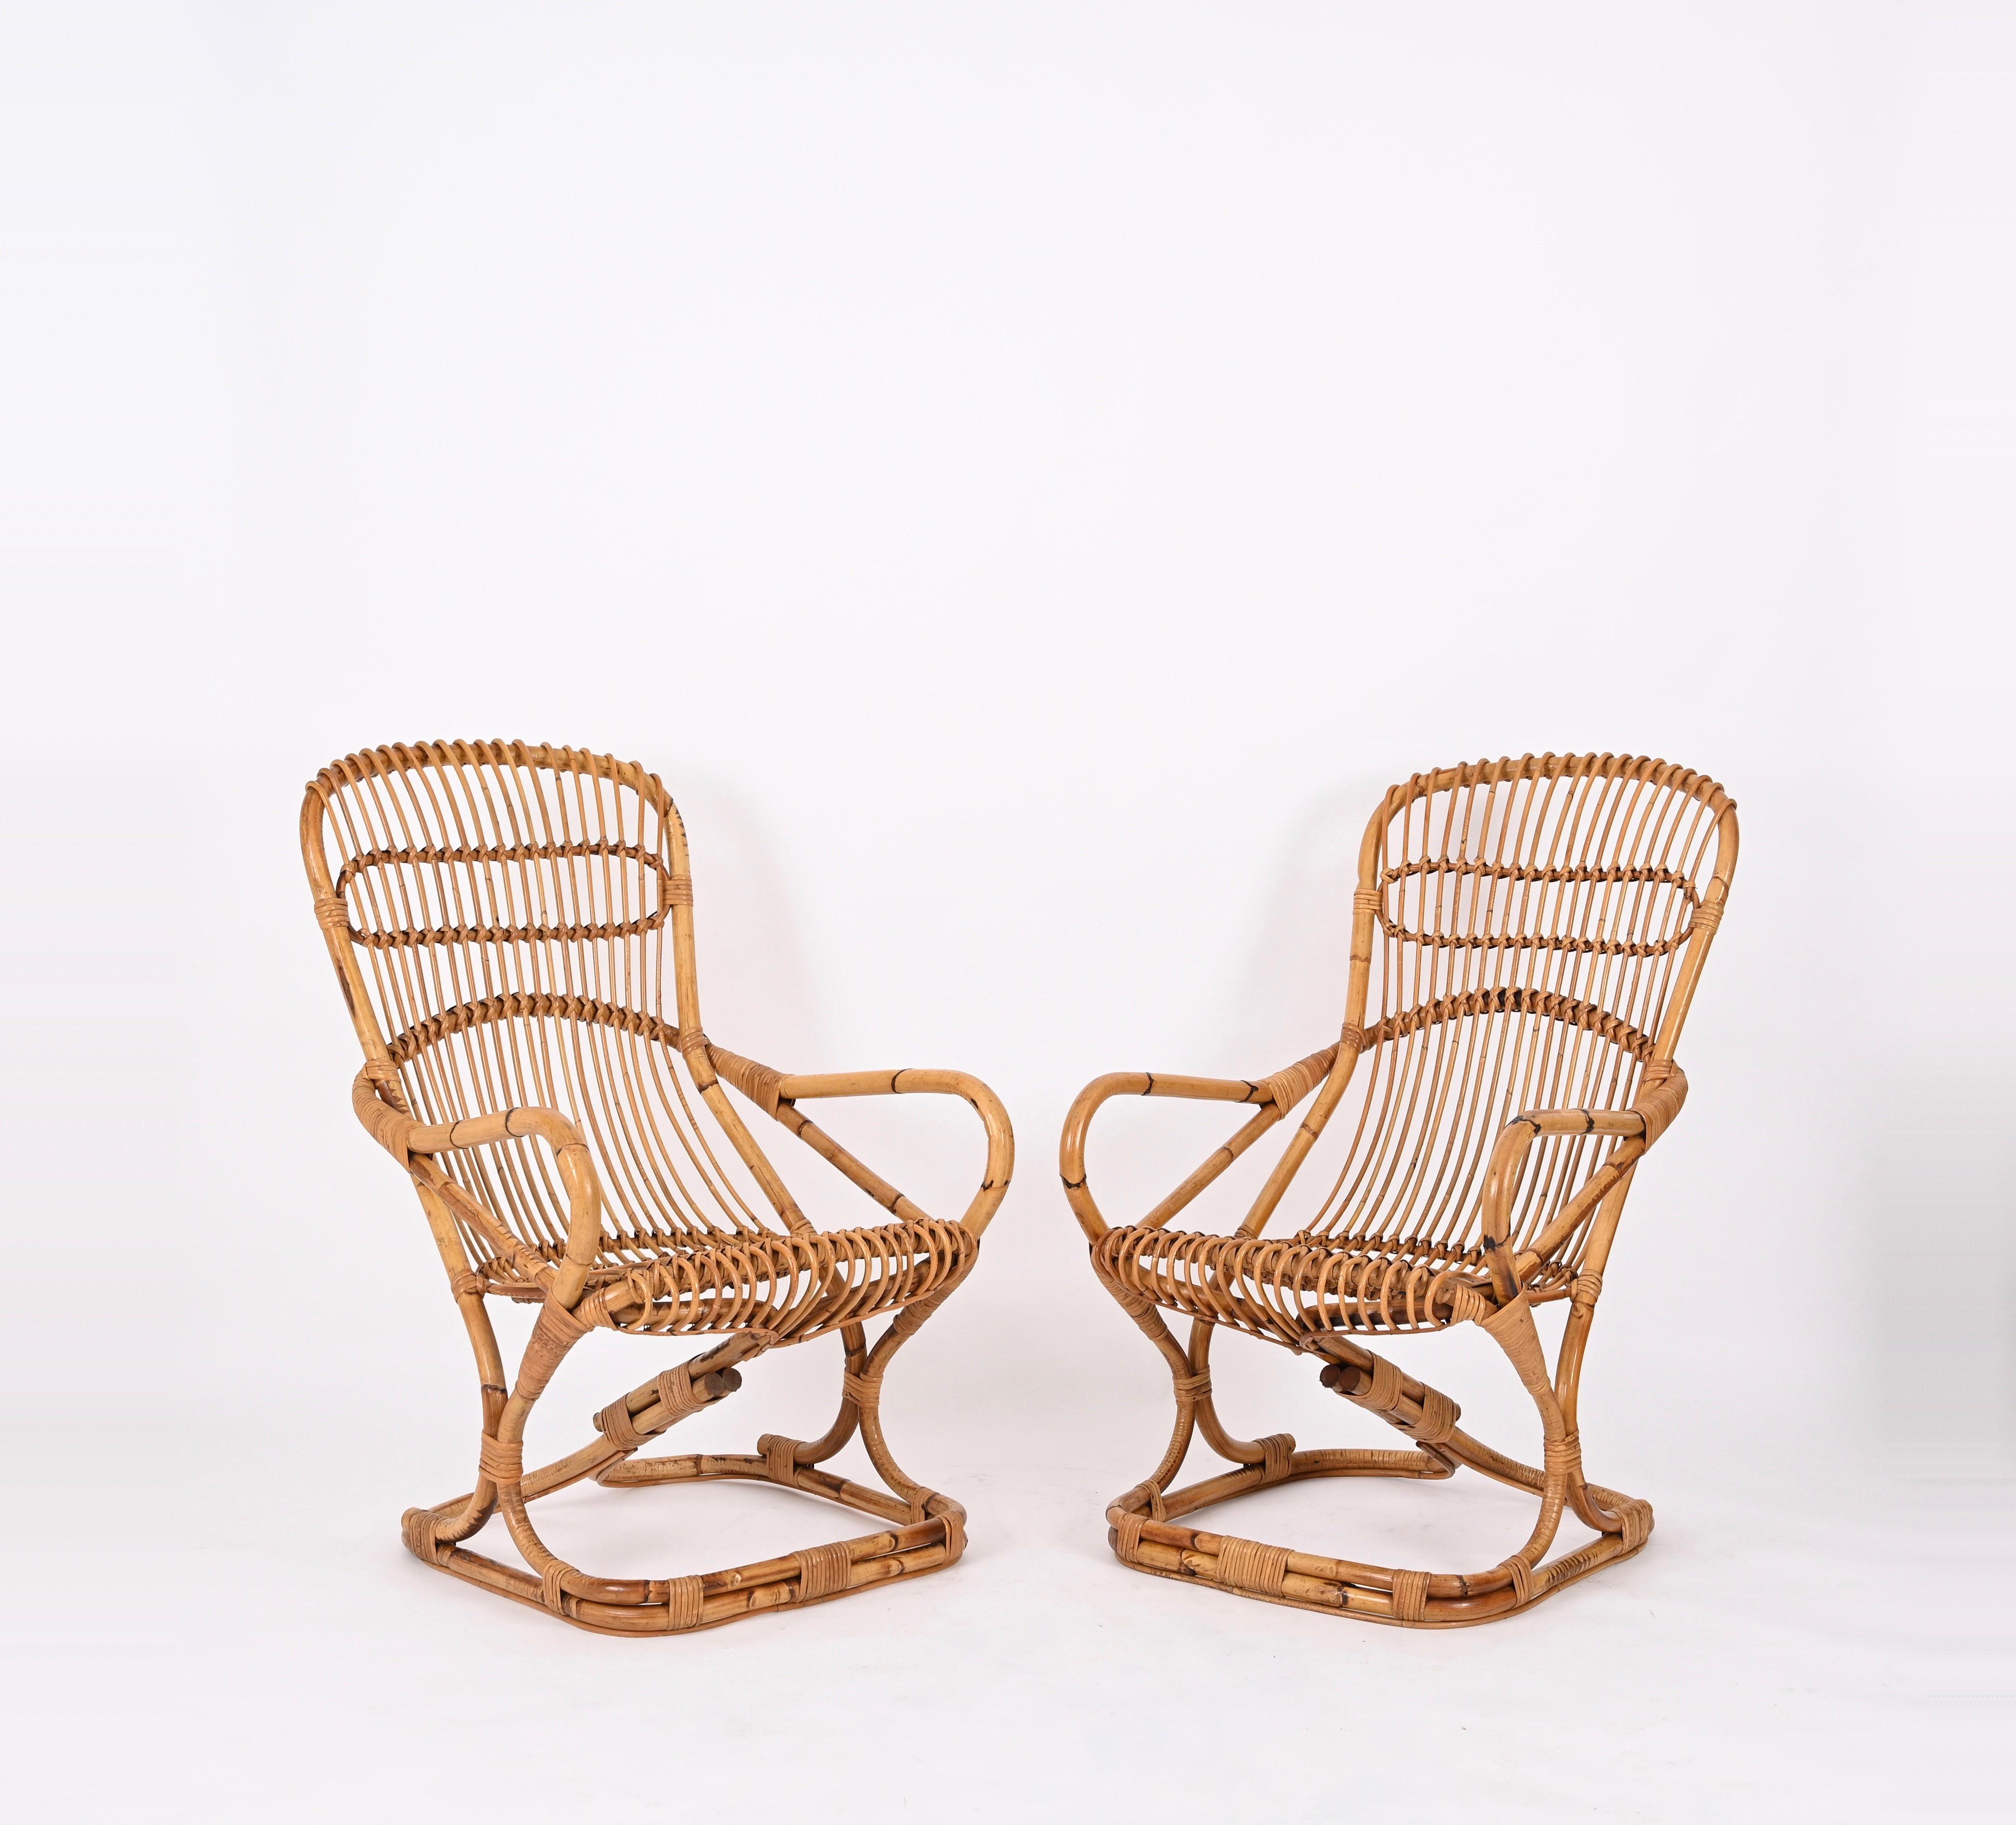 Pair of Midcentury Italian Wicker and Rattan Armchairs by Tito Agnoli, 1960s For Sale 8